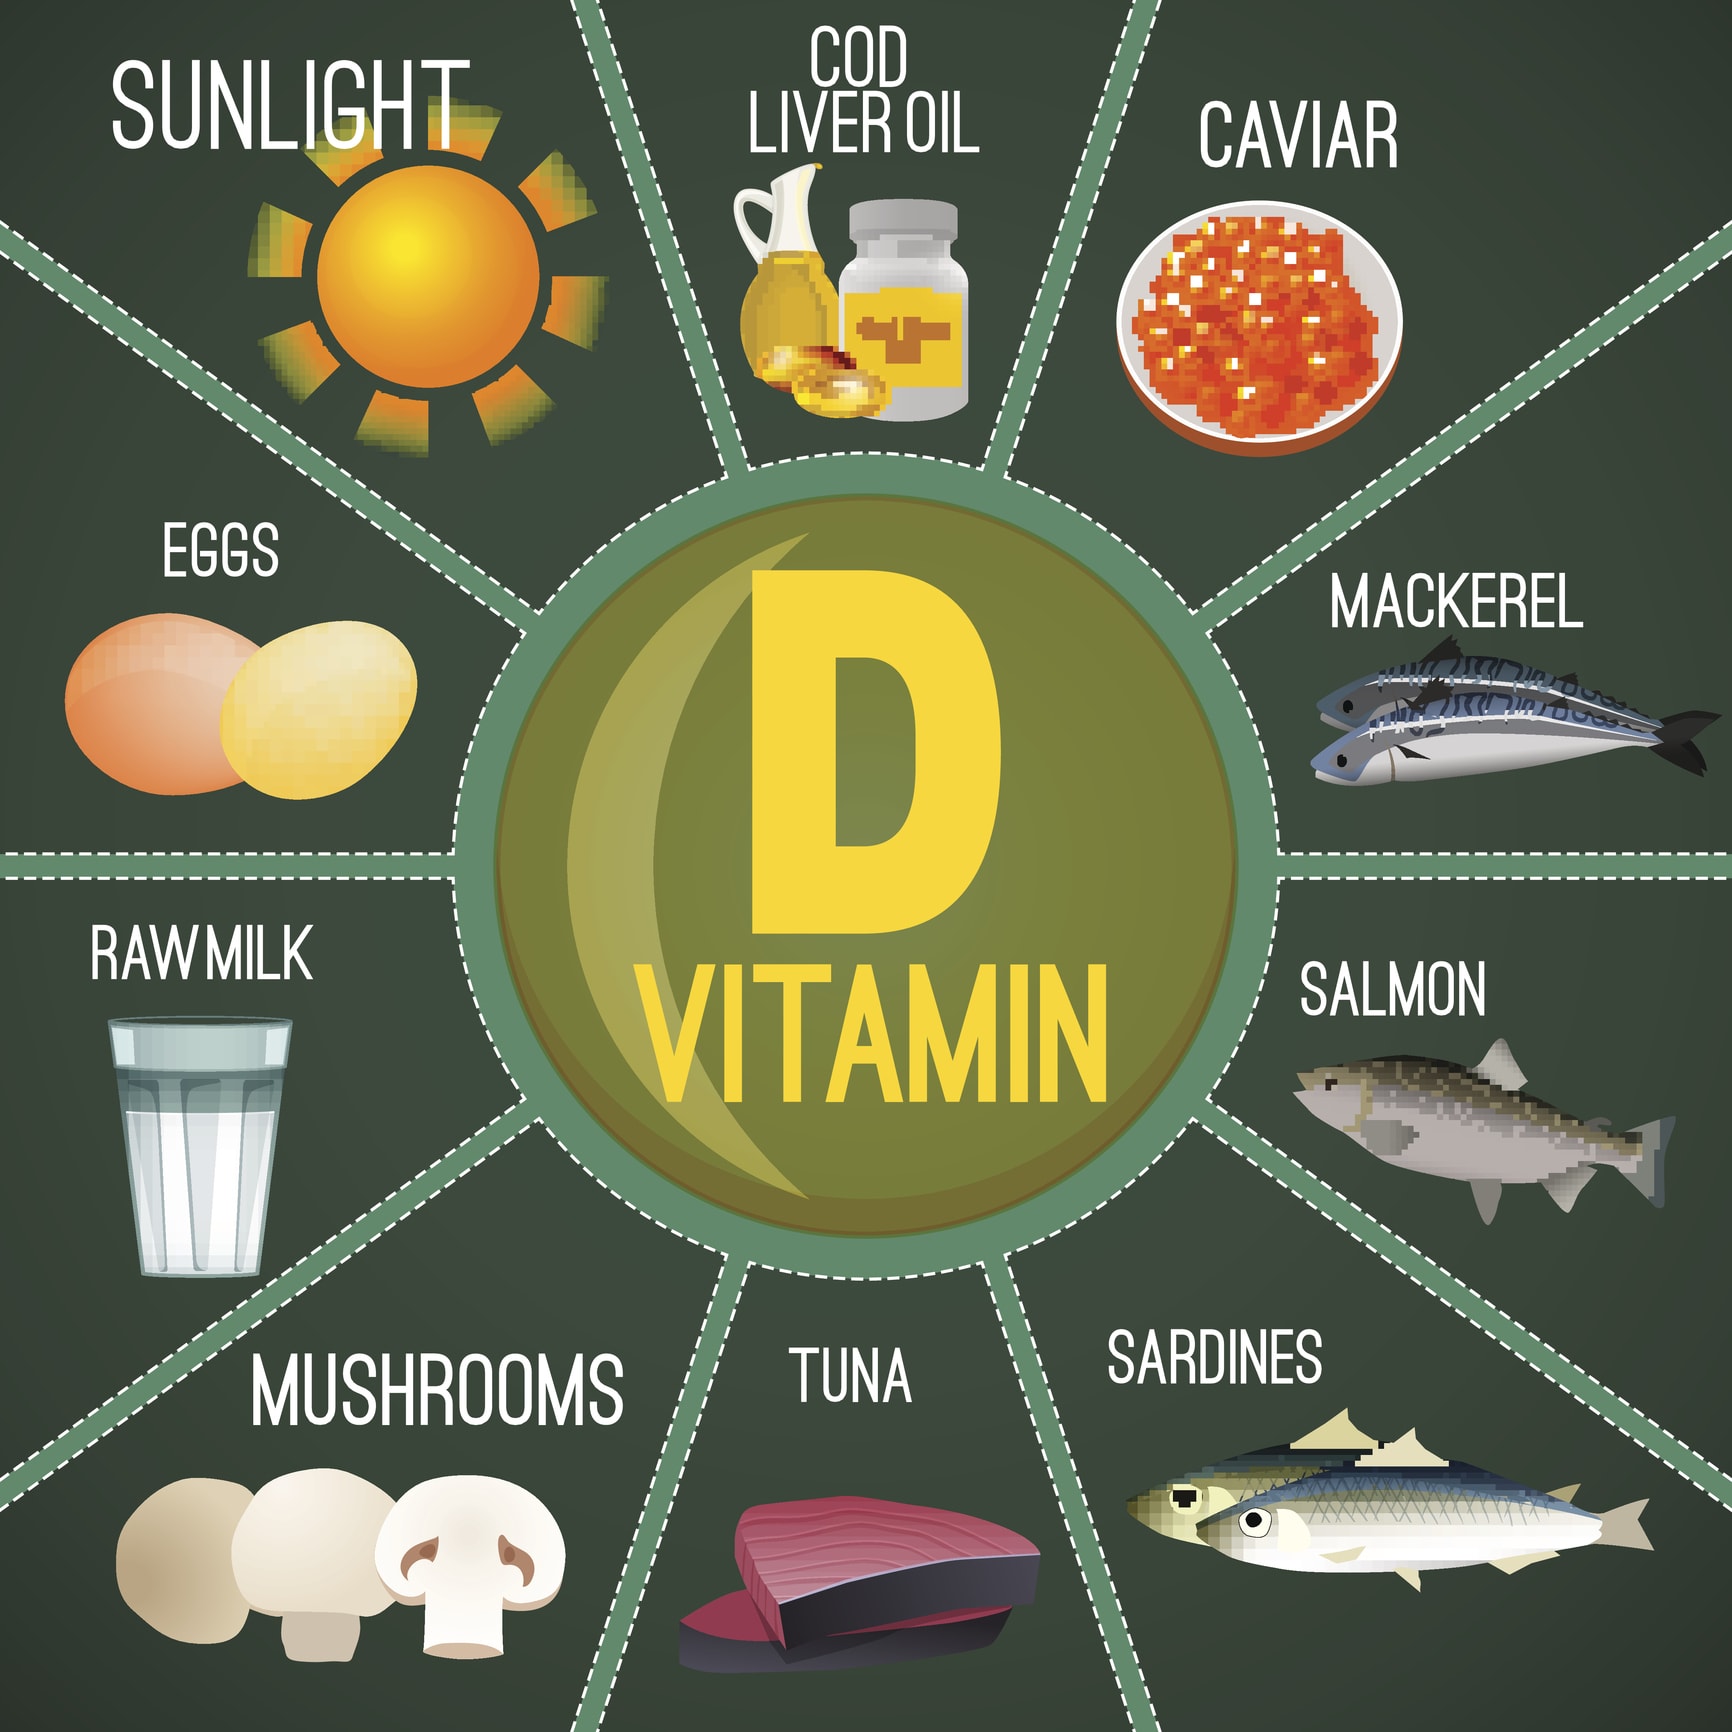 Did You Get Your Vitamin D Today? - Farmers' Almanac - Plan Your Day